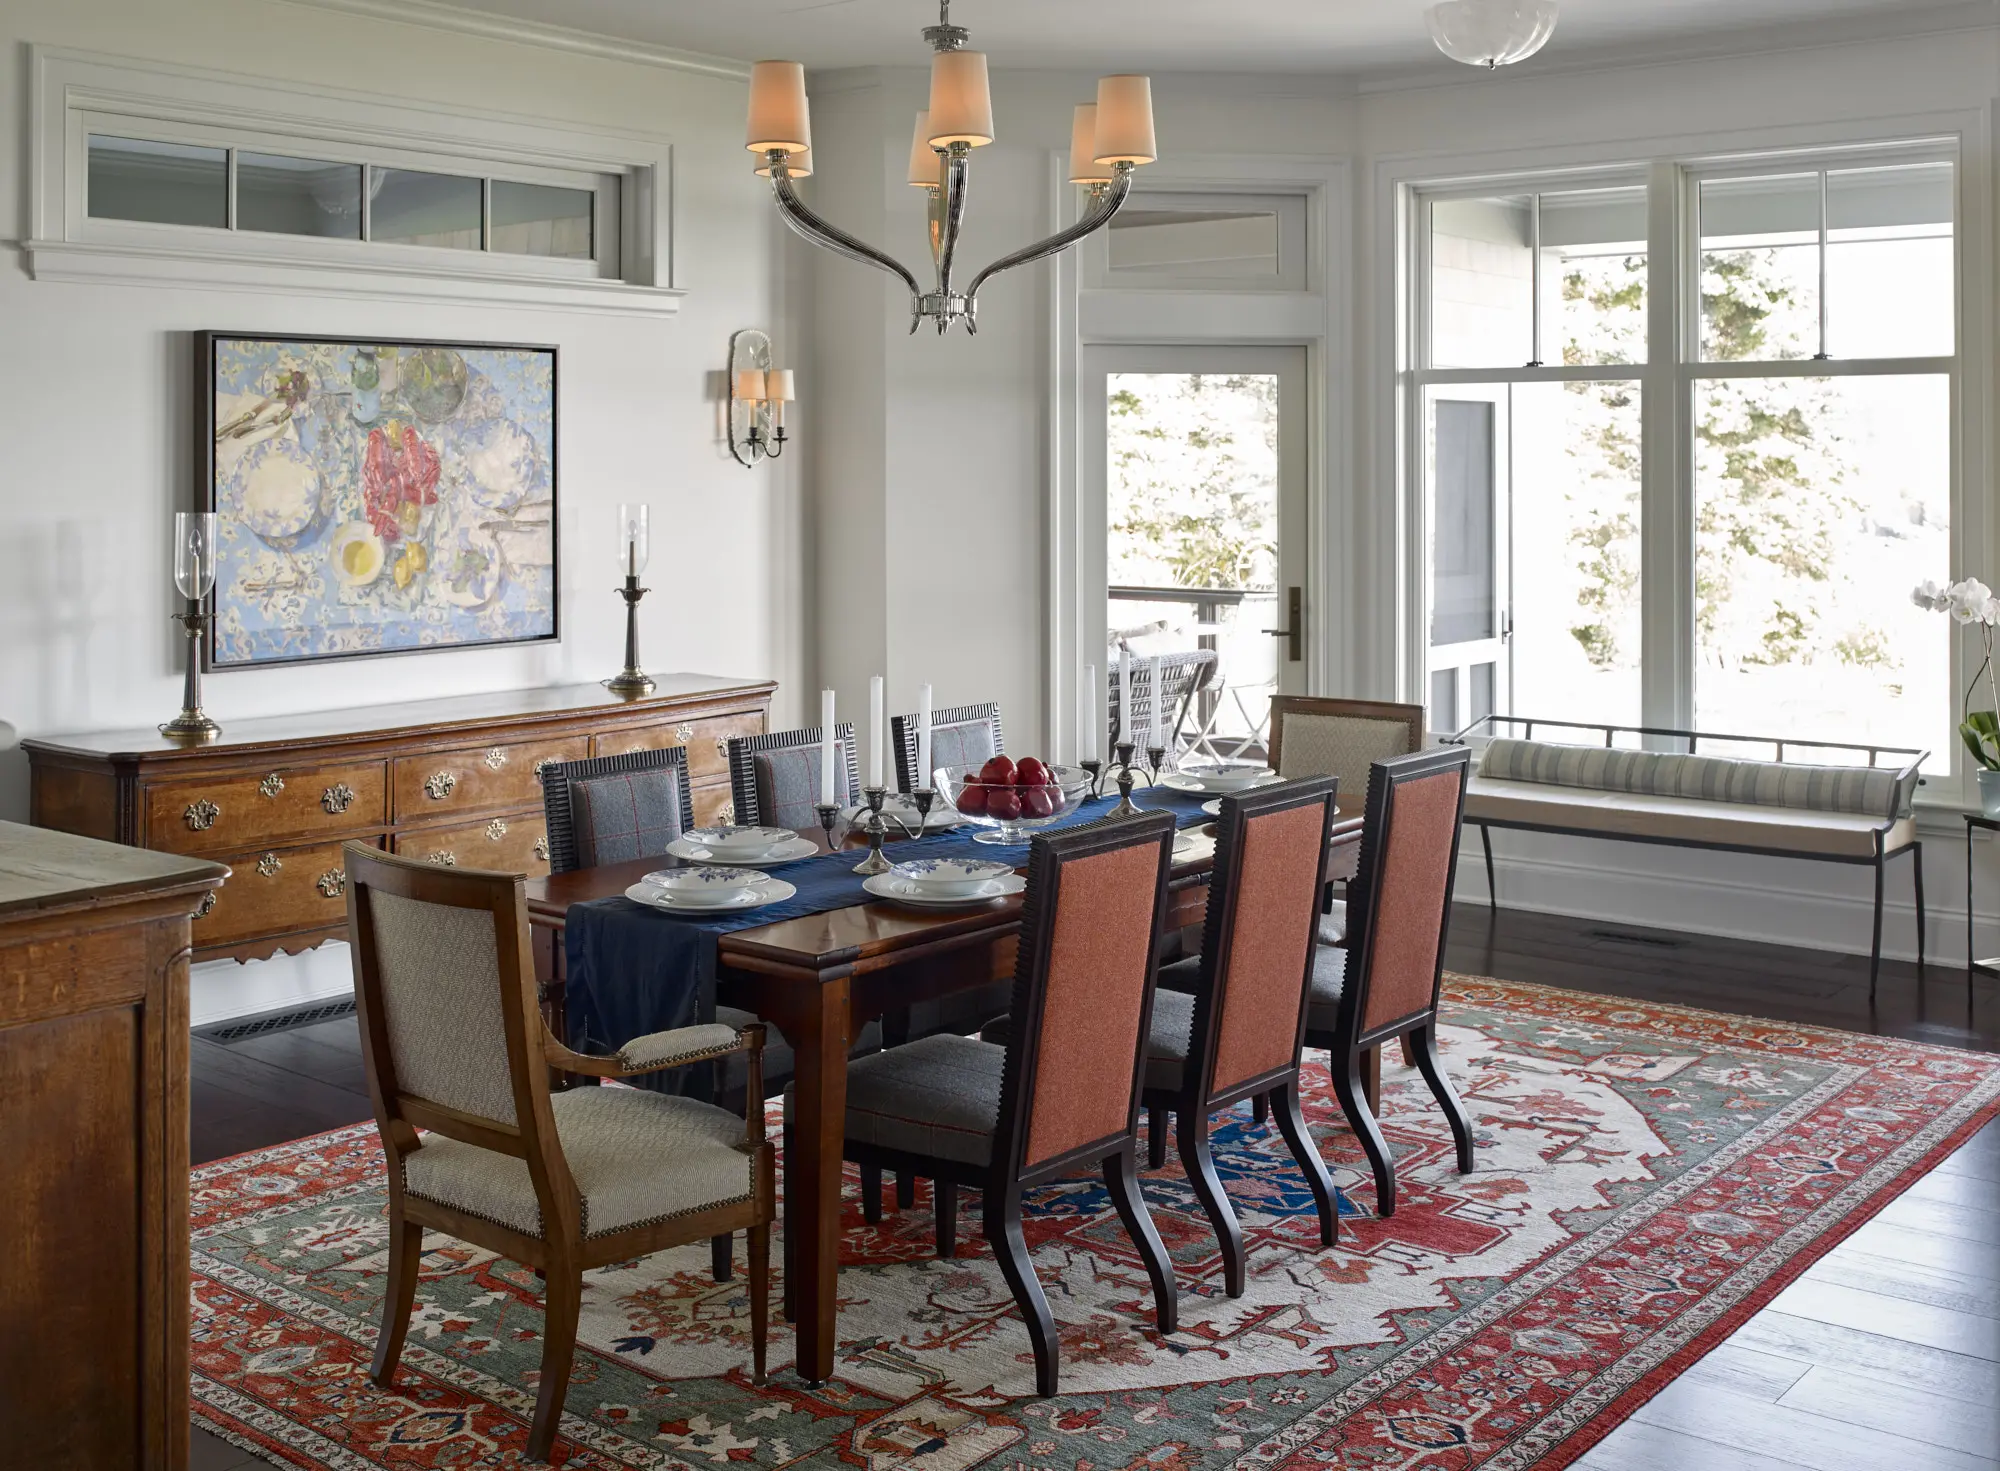 Formal dining room with natural light and red rug